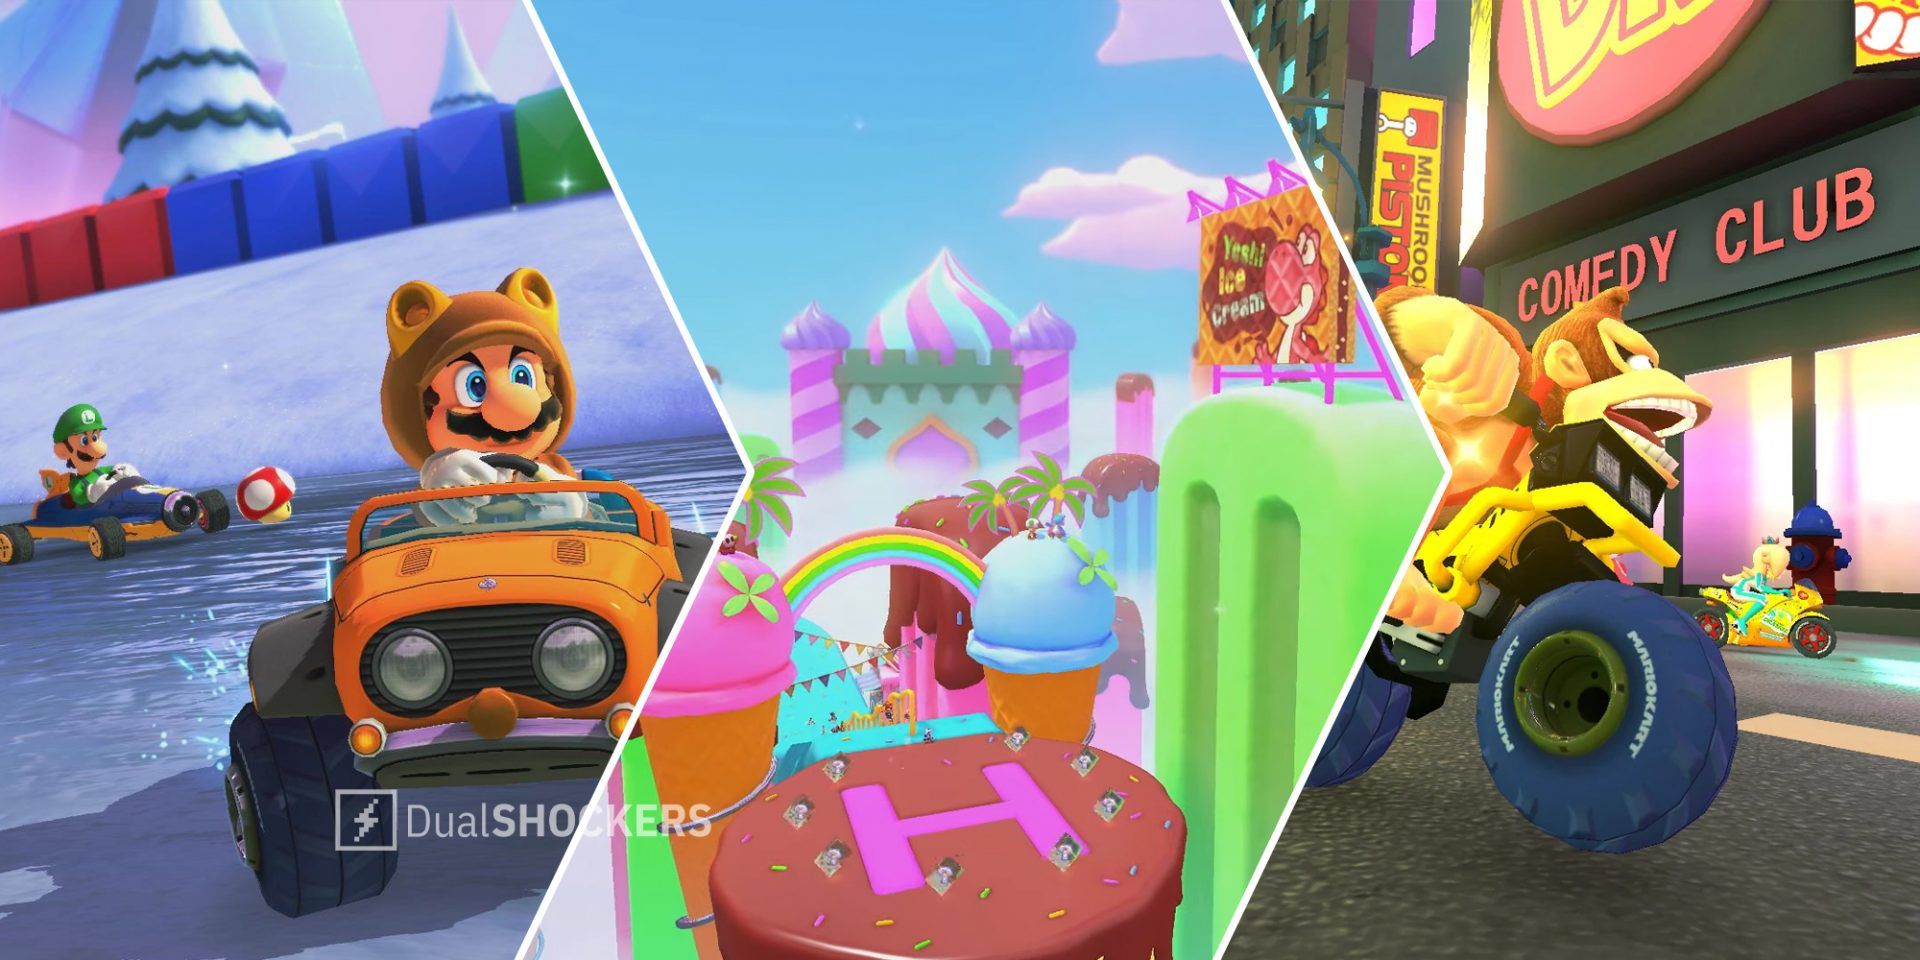 Mario Kart 8 Deluxe DLC Wave 2 Snow Land on left, Sky-High Sundae in middle, New York Minute on right